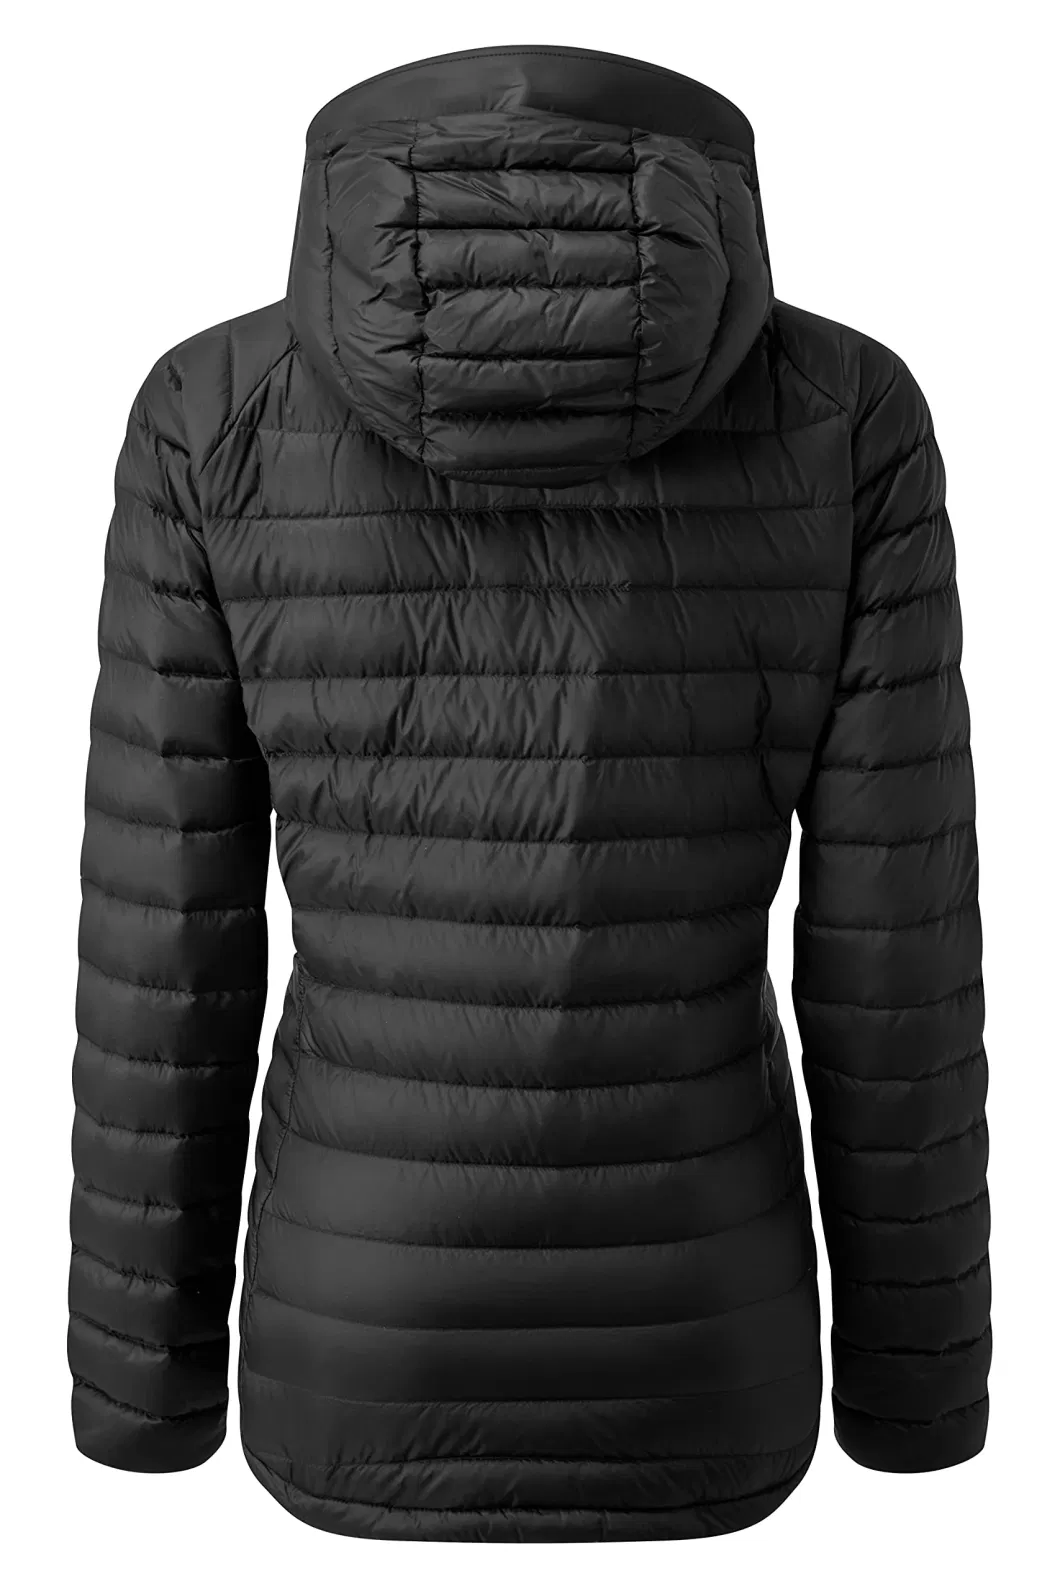 Asiapo China Factory Women&prime;s Red Down Jacket for Hiking/ Climbing/ Skiing